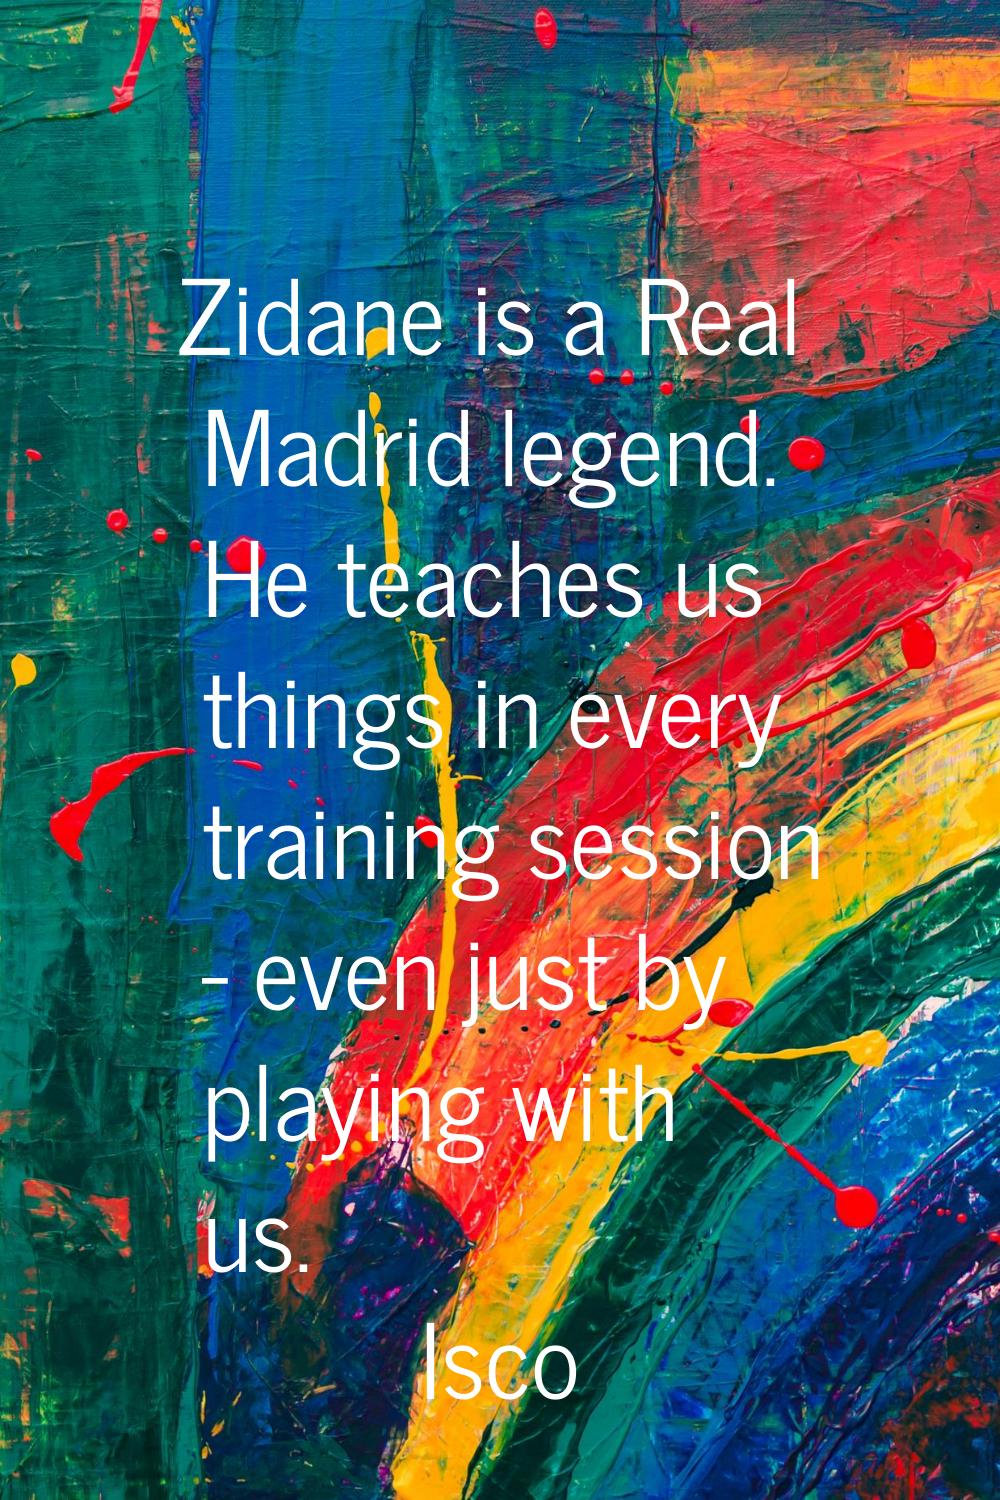 Zidane is a Real Madrid legend. He teaches us things in every training session - even just by playi